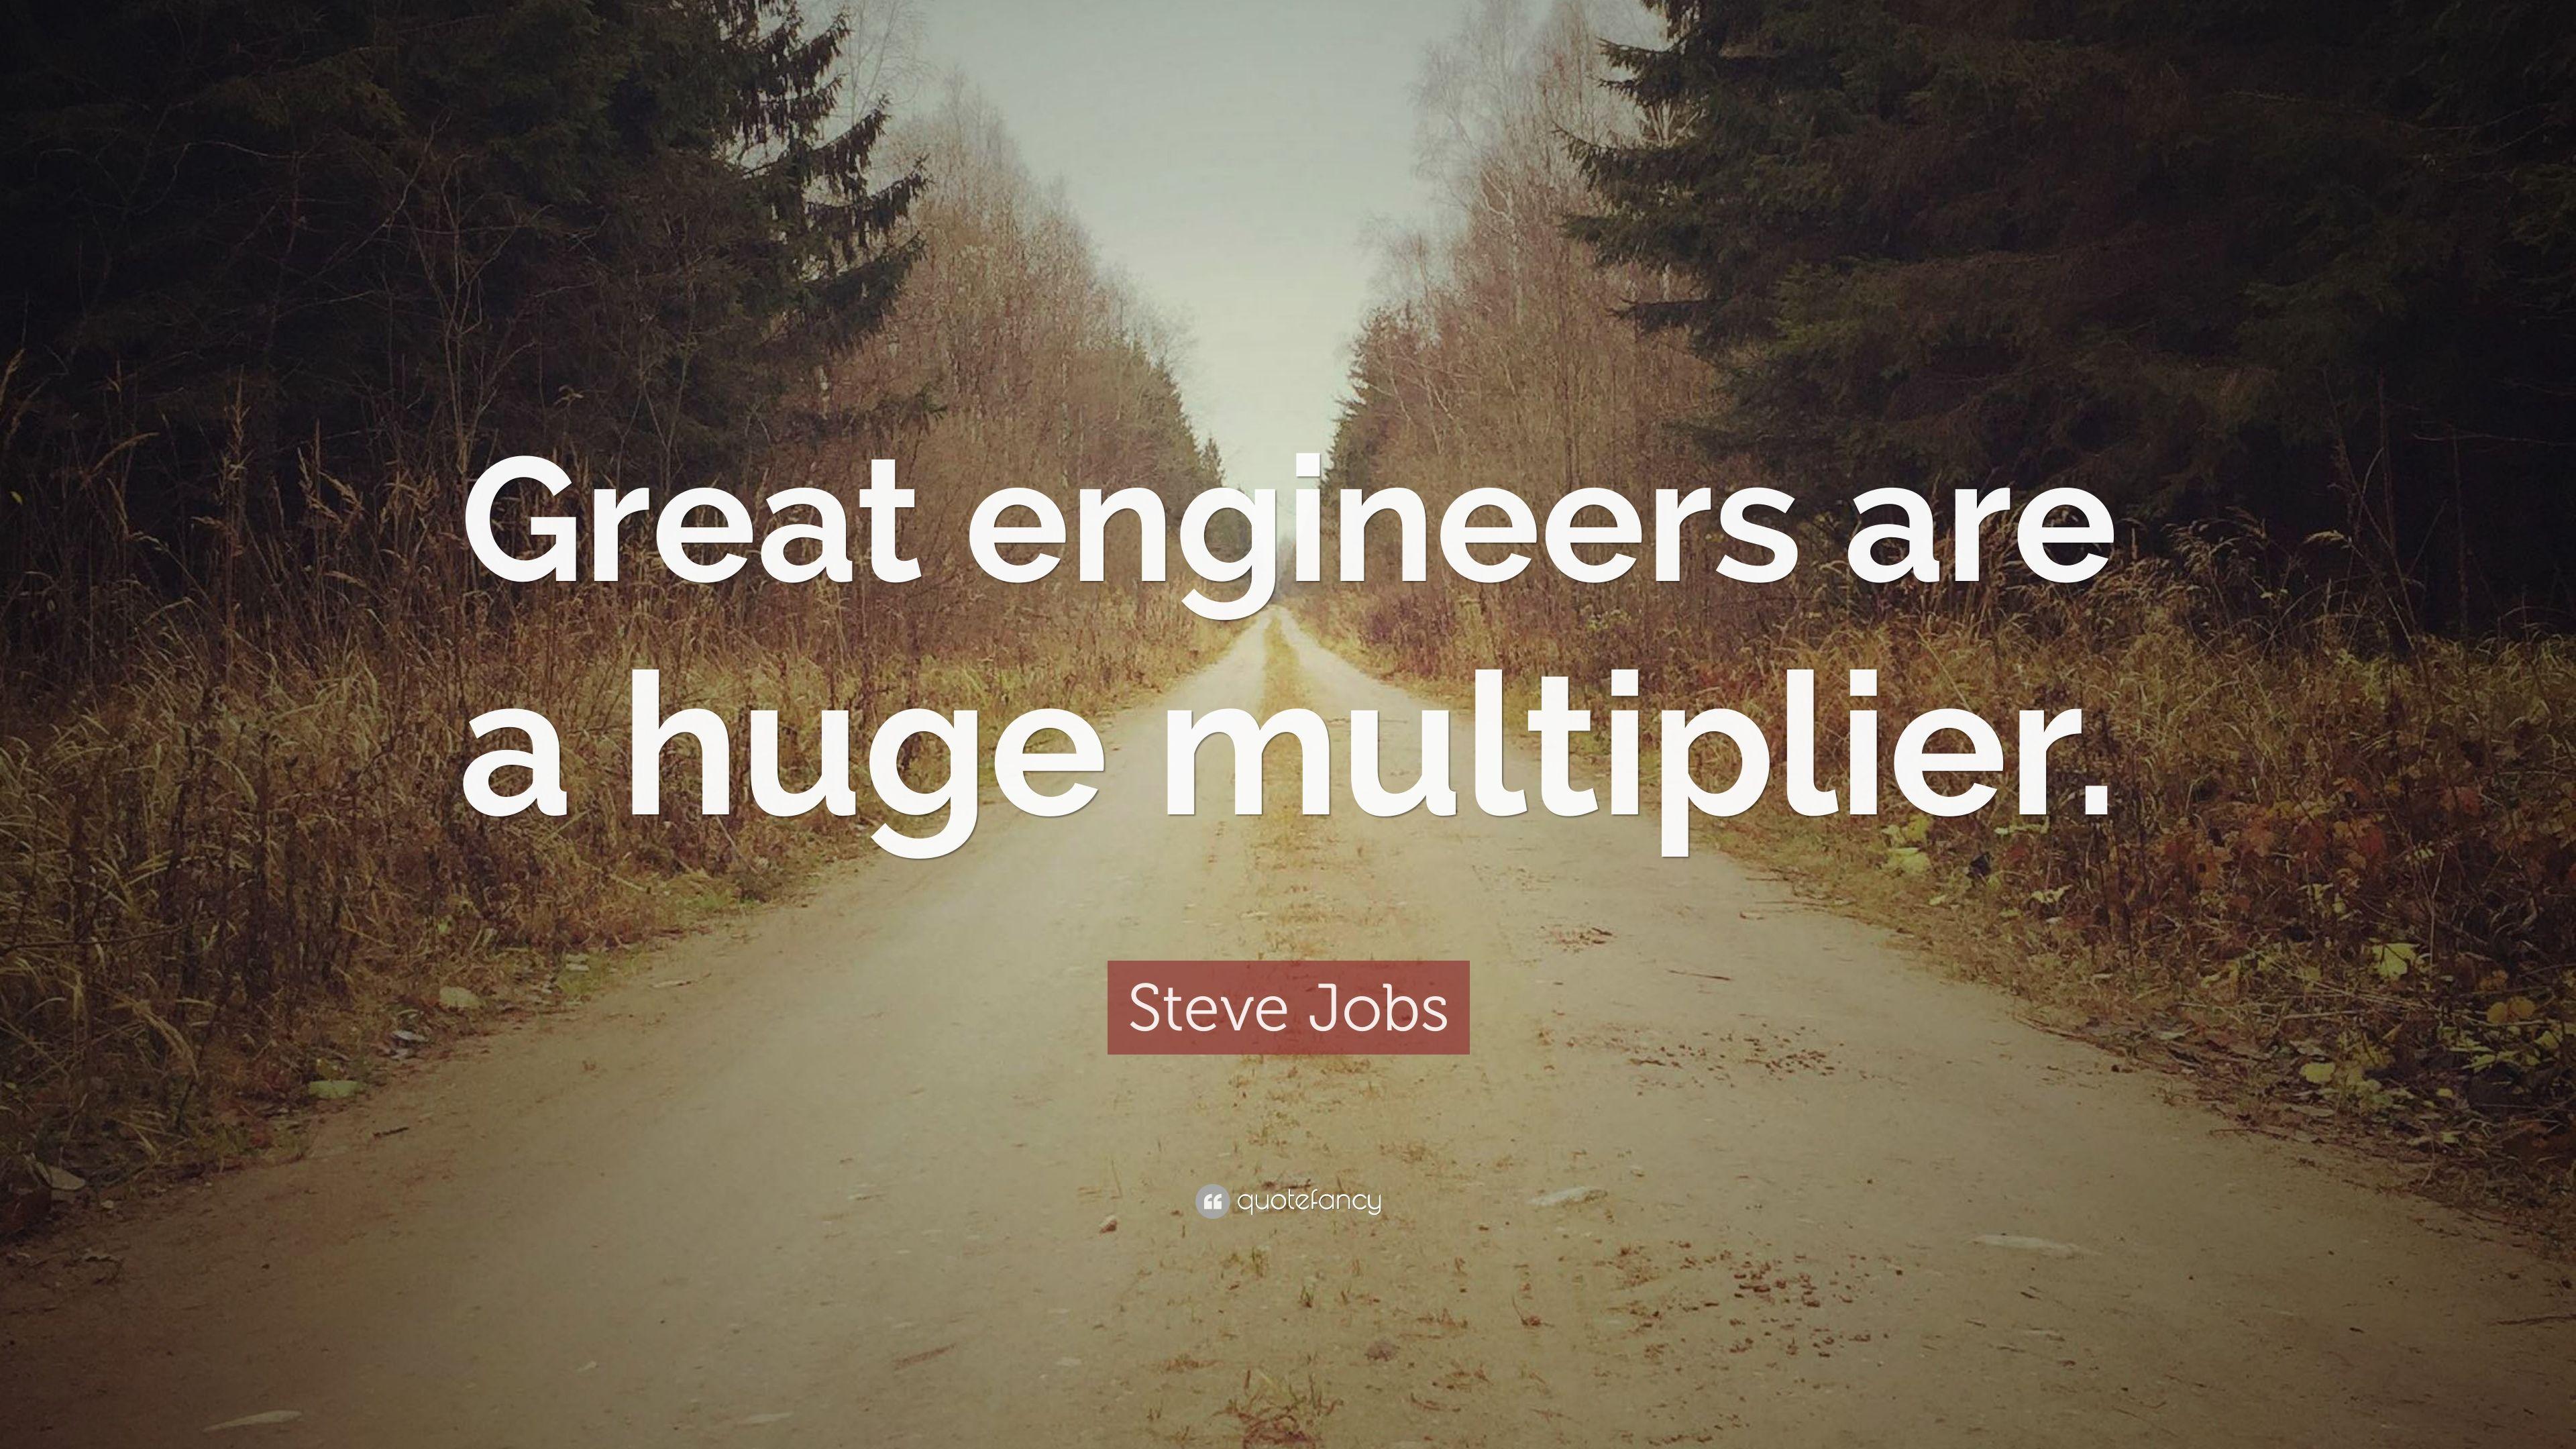 Steve Jobs Quote: “Great engineers are a huge multiplier.” 7